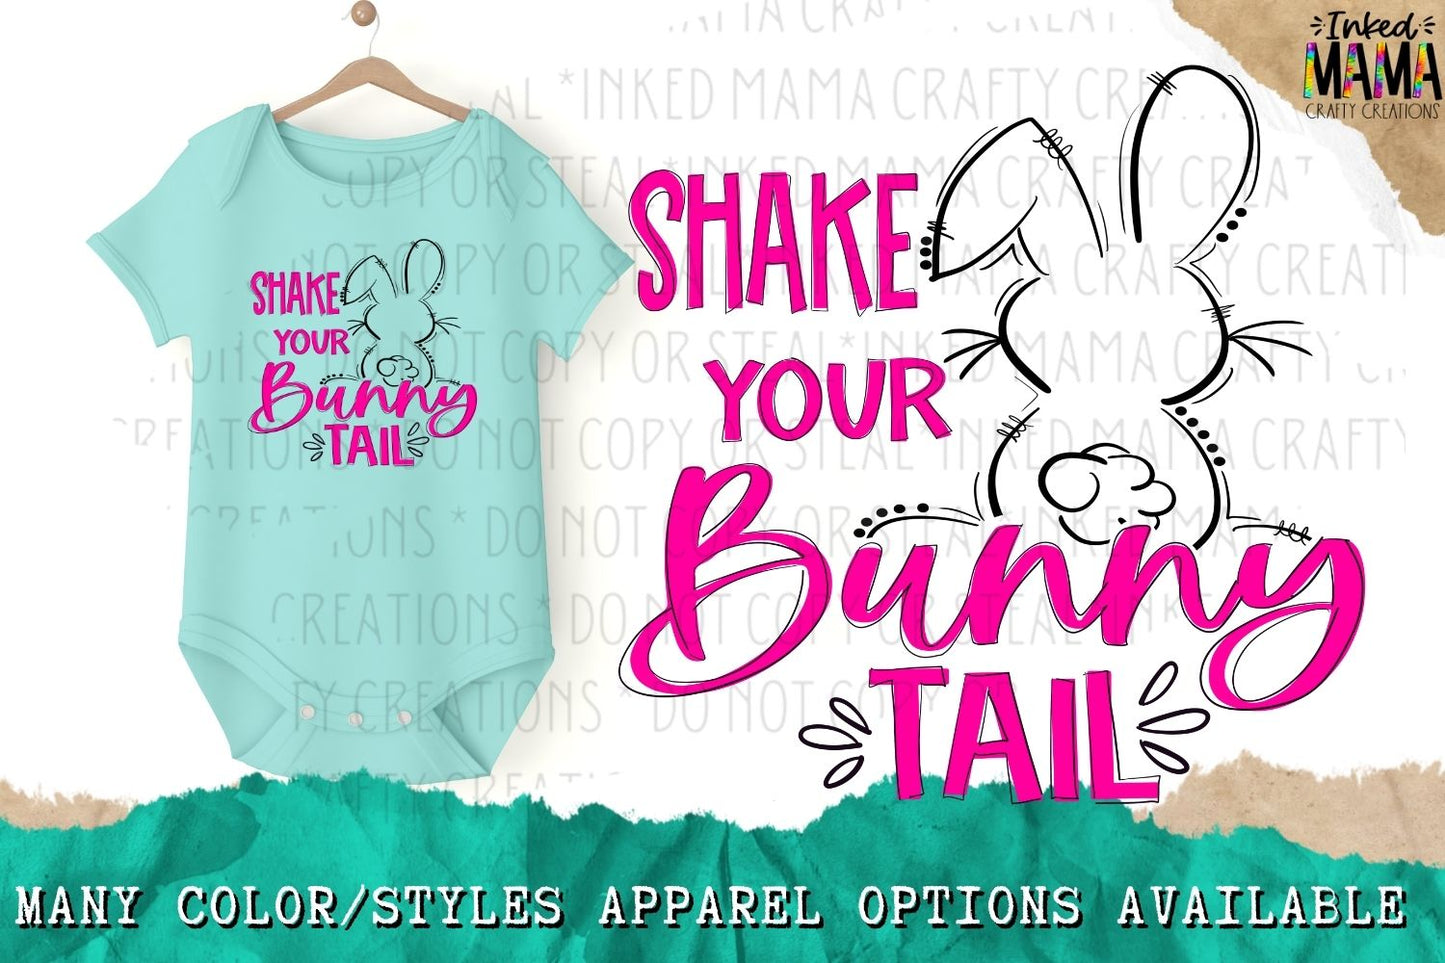 Shake your bunny tail - Easter Apparel